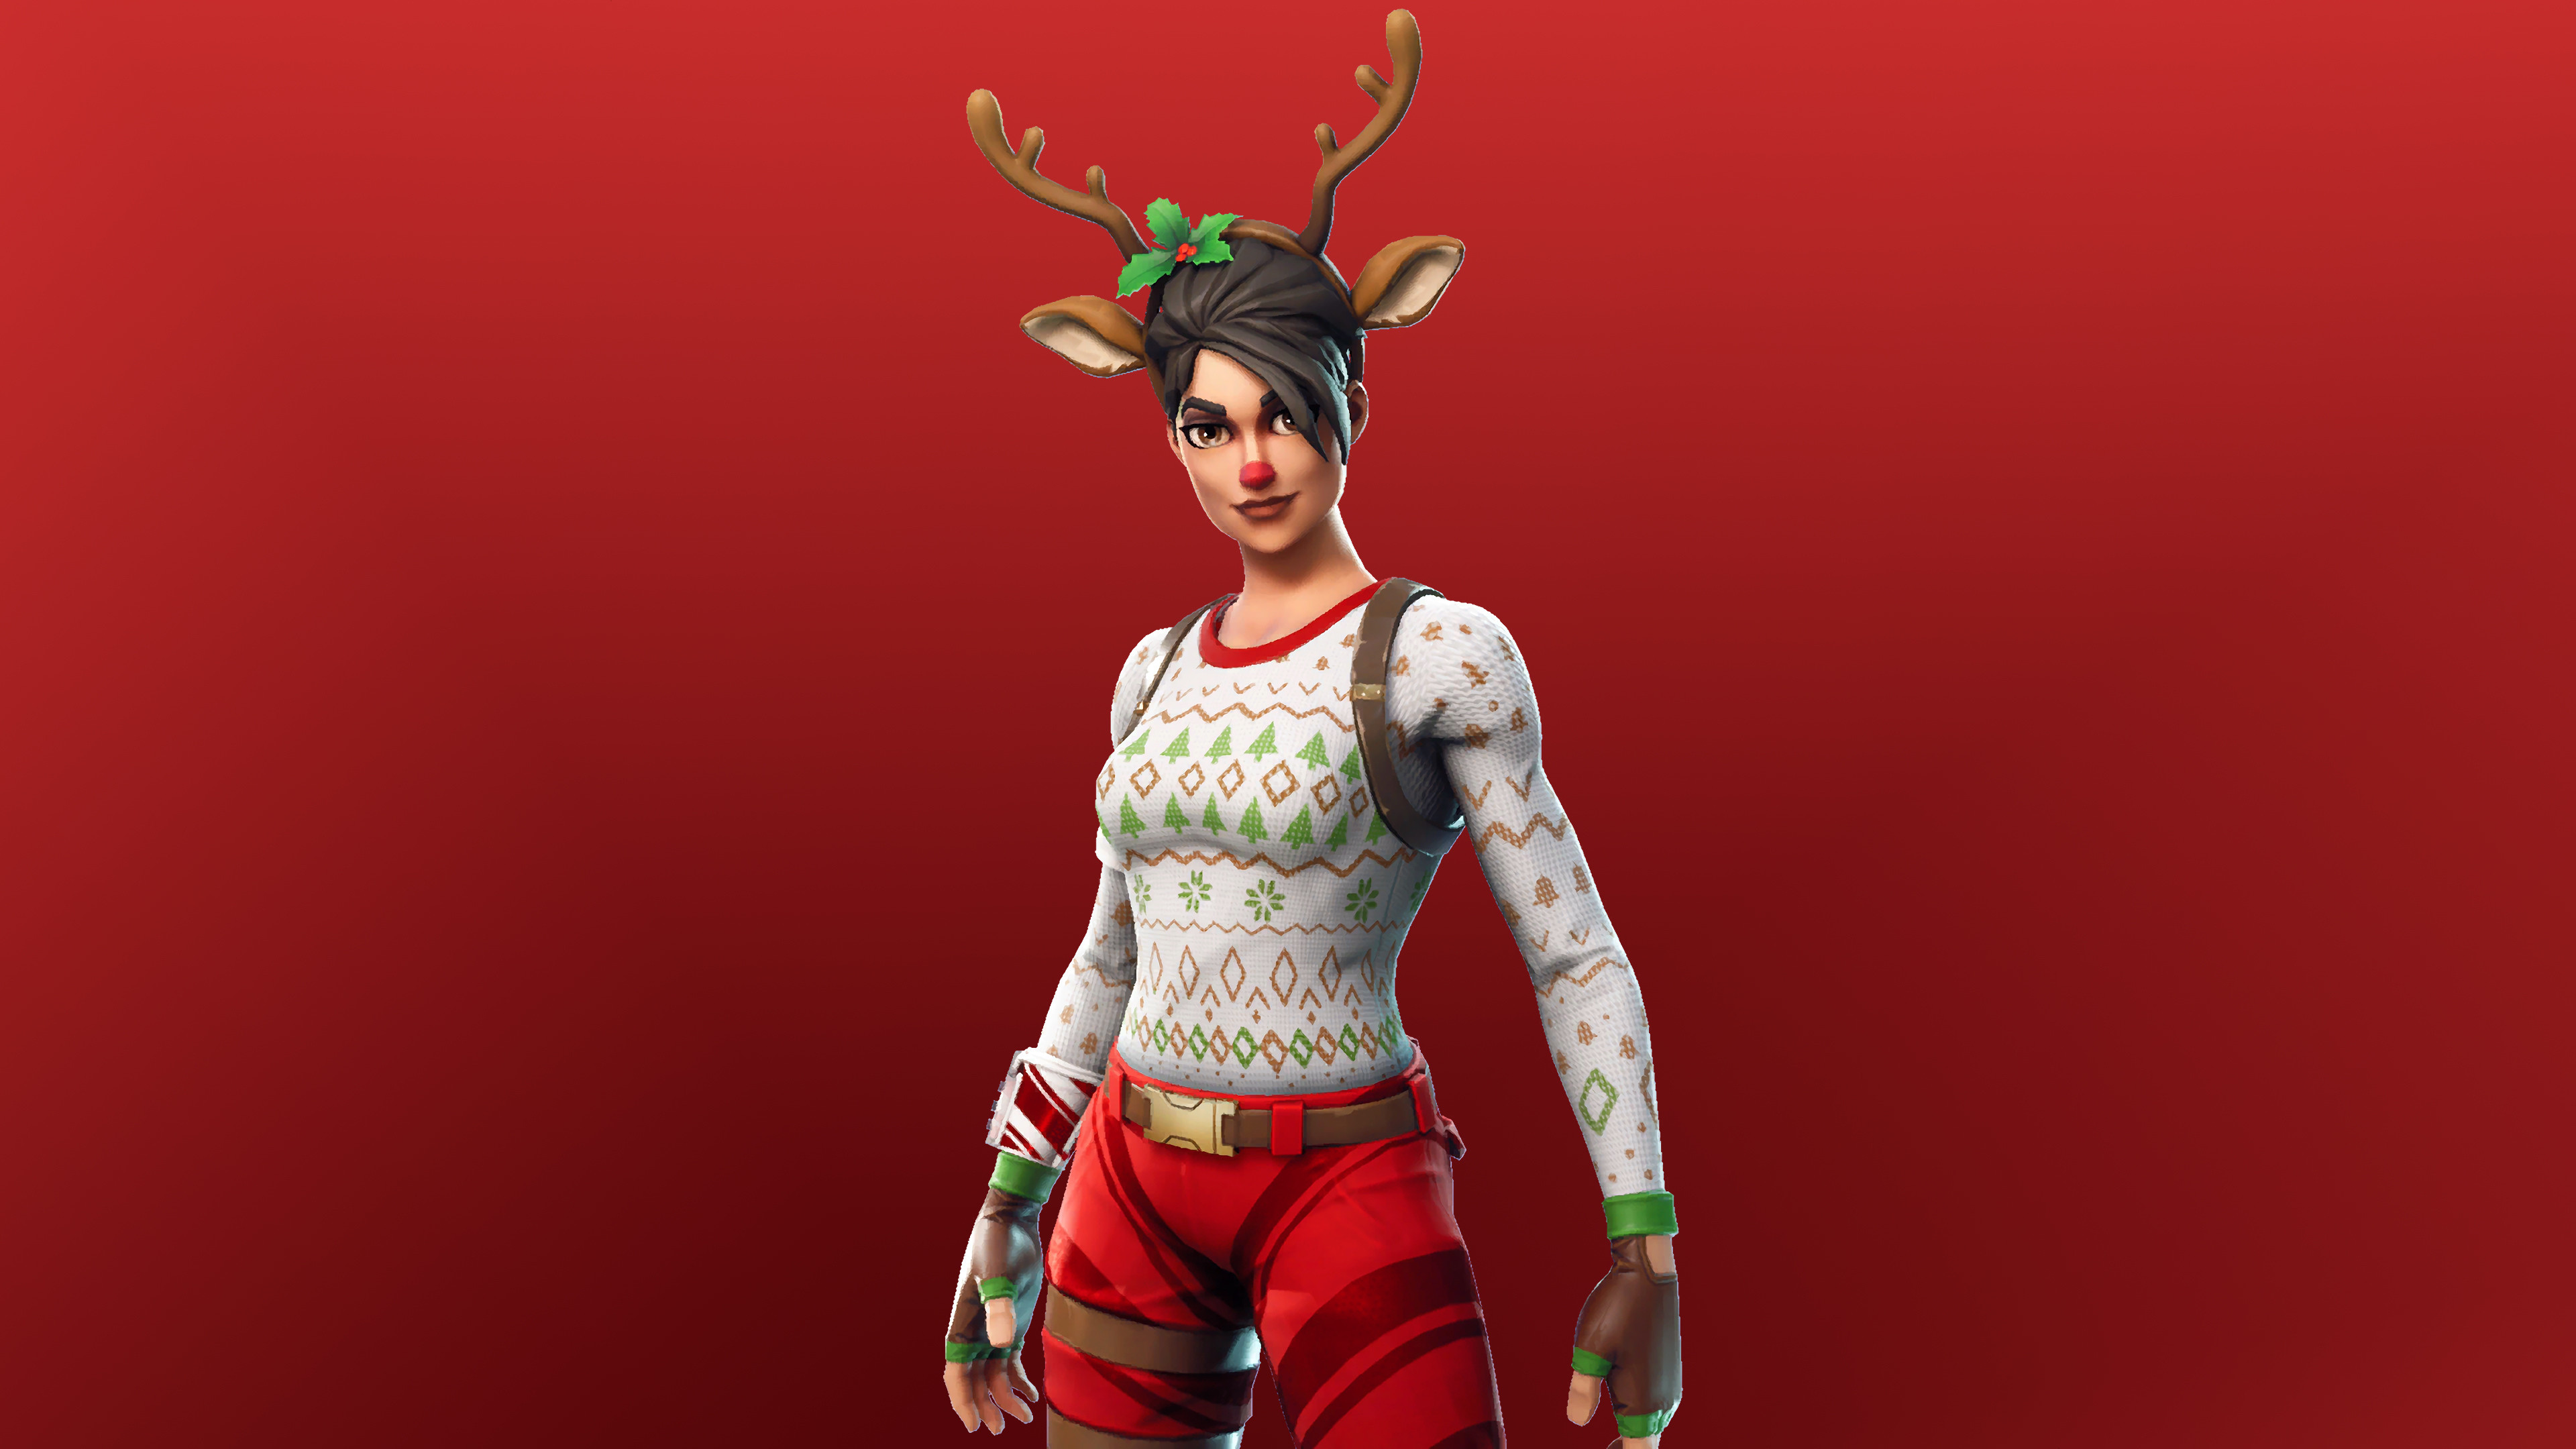 Red Nosed Raider Wallpaper Top